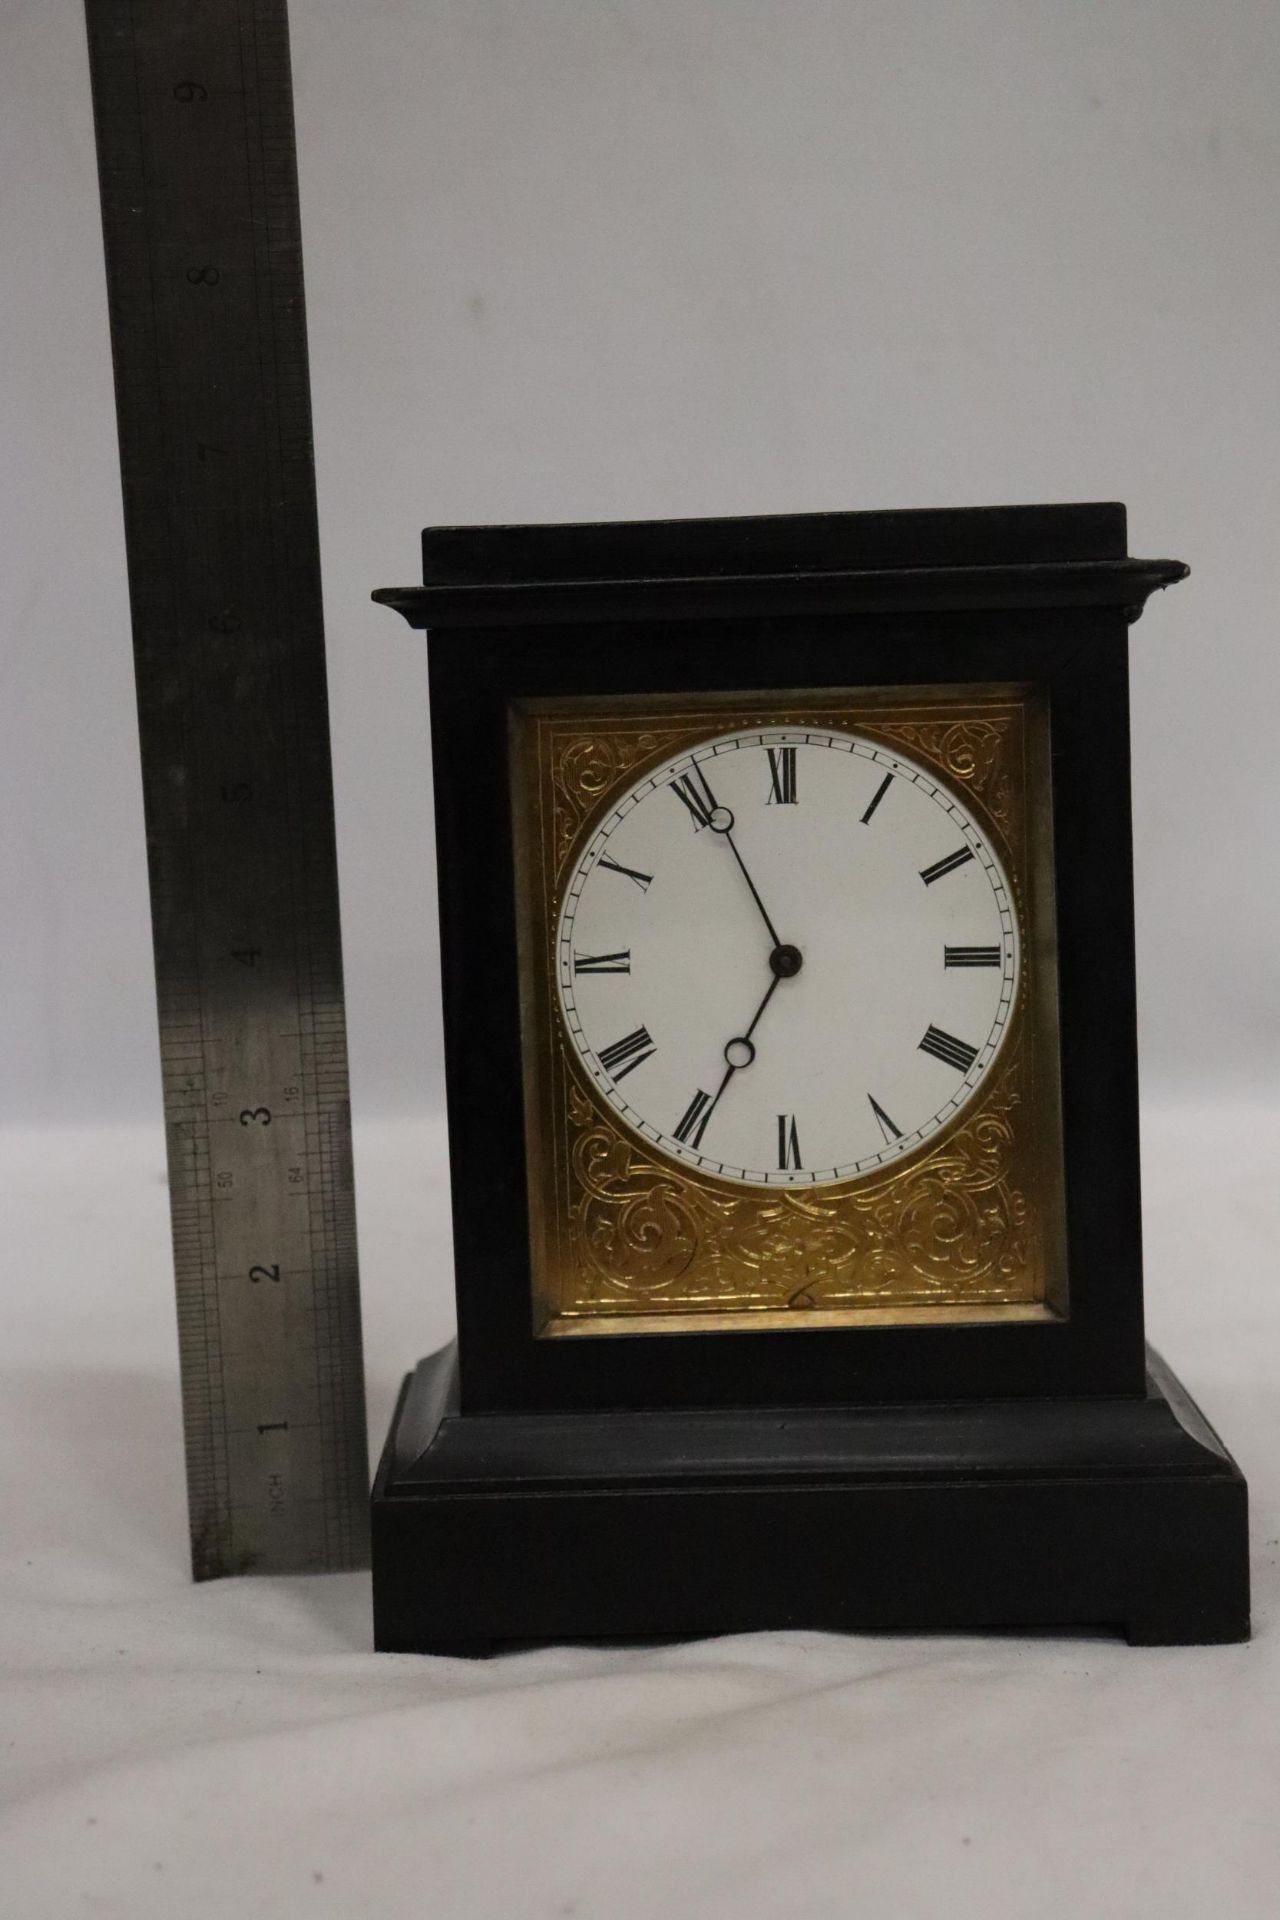 A MID 19TH CENTURY MAHOGANY MANTLE CLOCK THE MOVEMENT SIGNED V.A.P. BREVETTE S.G.D.G NO 653 - Image 7 of 7